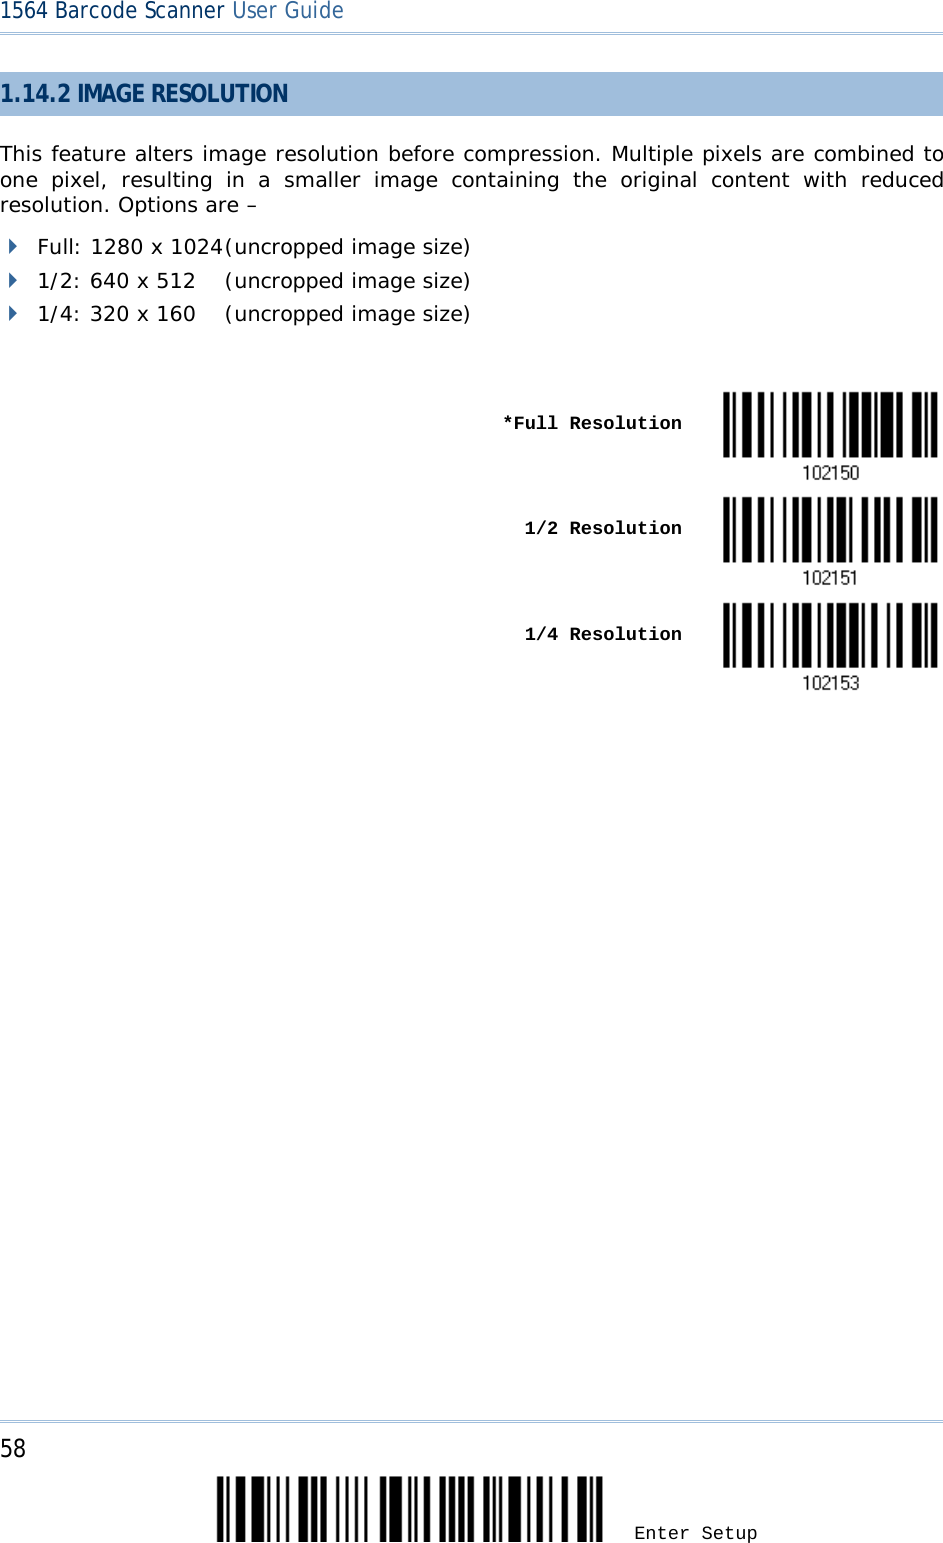 58 Enter Setup 1564 Barcode Scanner User Guide  1.14.2 IMAGE RESOLUTION This feature alters image resolution before compression. Multiple pixels are combined to one pixel, resulting in a smaller image containing the original content with reduced resolution. Options are –   Full: 1280 x 1024 (uncropped image size)  1/2: 640 x 512 (uncropped image size)  1/4: 320 x 160 (uncropped image size)     *Full Resolution       1/2 Resolution     1/4 Resolution                                 